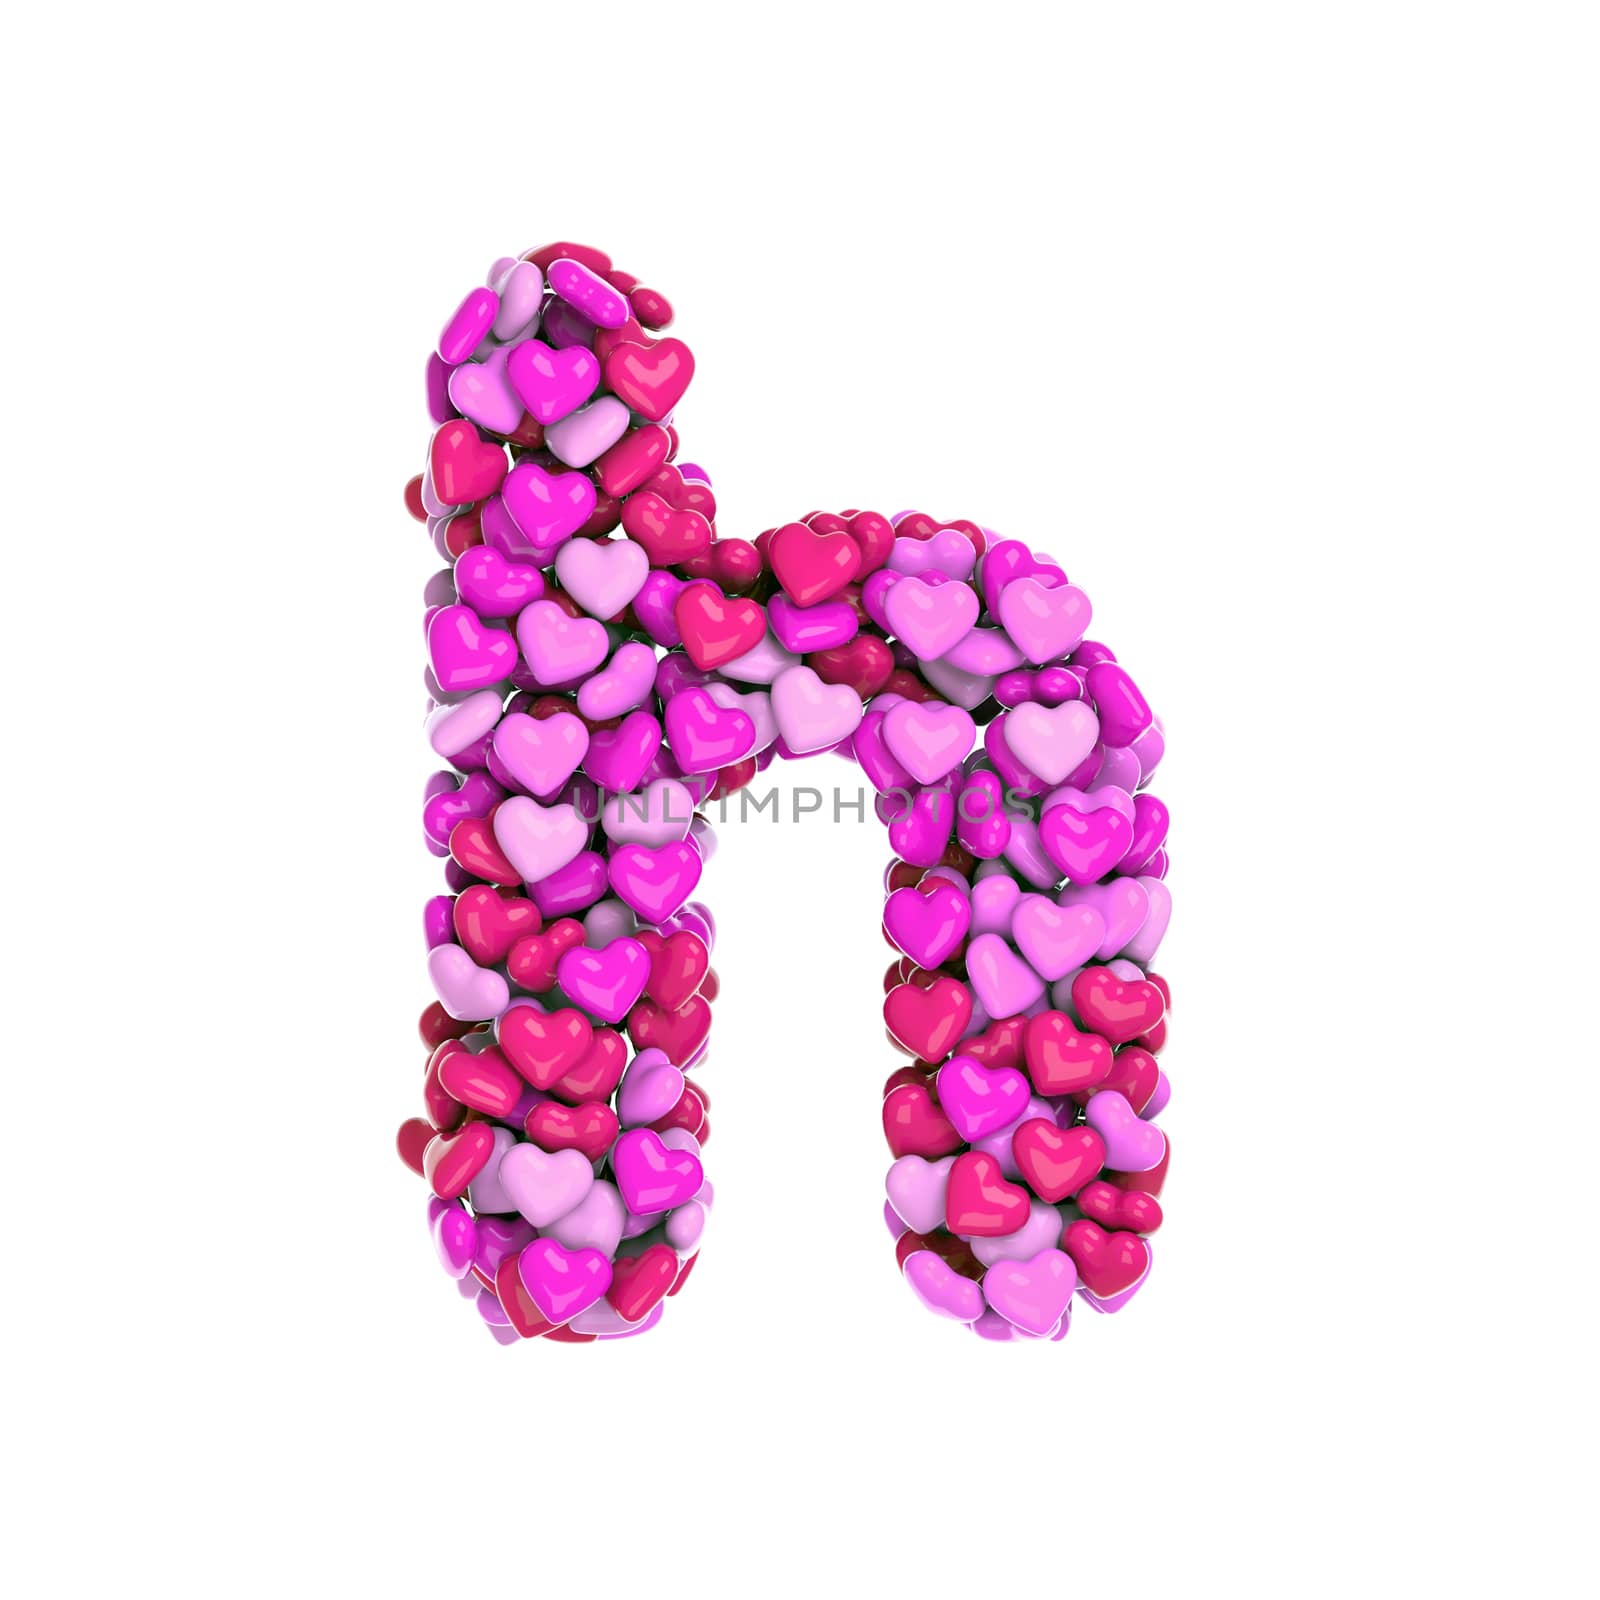 Valentine letter H - Small 3d pink hearts font isolated on white background. This alphabet is perfect for creative illustrations related but not limited to Love, passion, wedding...